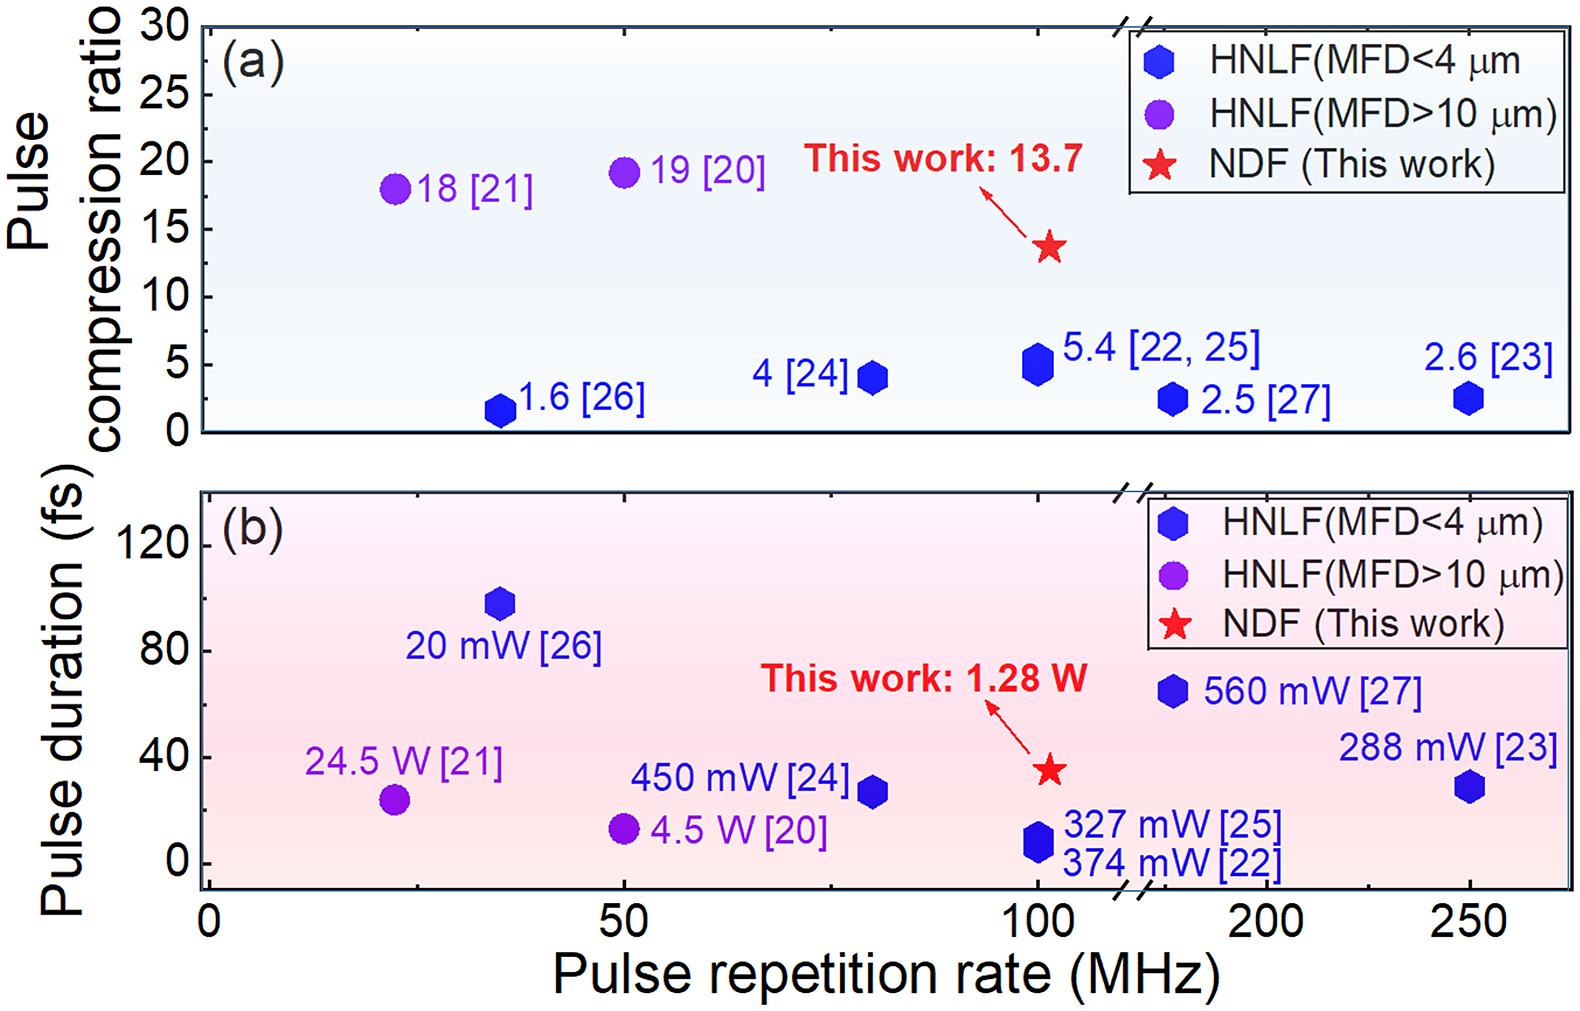 The reported 2-μm all-fiber nonlinear pulse compressors. (a) Pulse compression ratio versus pulse repetition rate. Label: the reported values of the pulse compression ratio. (b) Pulse duration versus pulse repetition rate. Label: the output average power. HNLF, highly nonlinear fiber; NDF, normal dispersion fiber; MFD, mode-field diameter; pulse compression ratio, the ratio between the driving laser pulse and the compressed laser pulse.